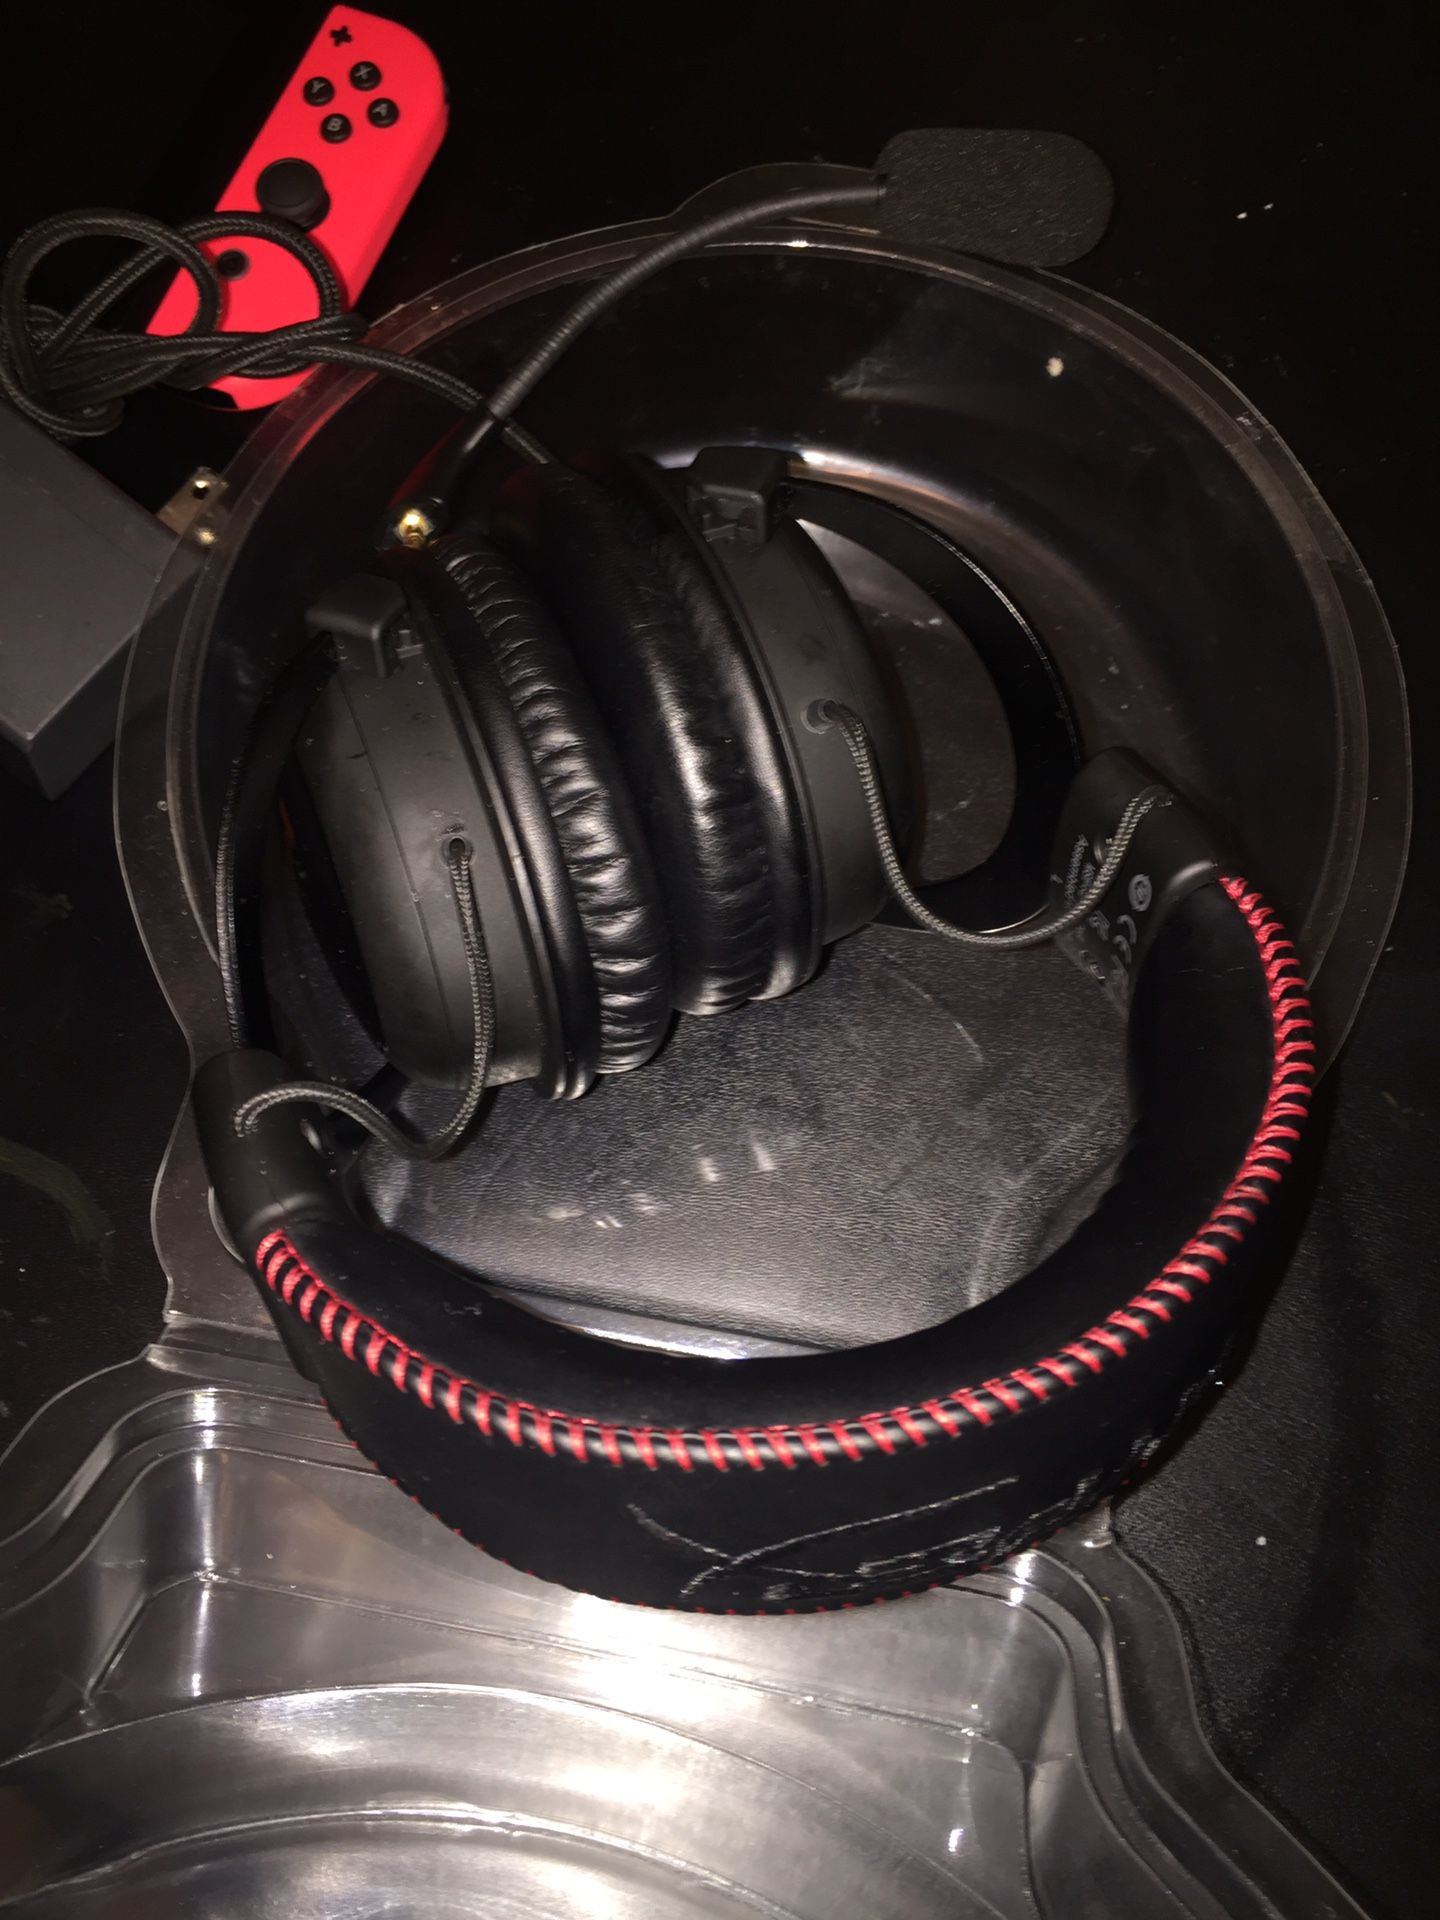 Hyper x premium gaming headset pc/ and consoles